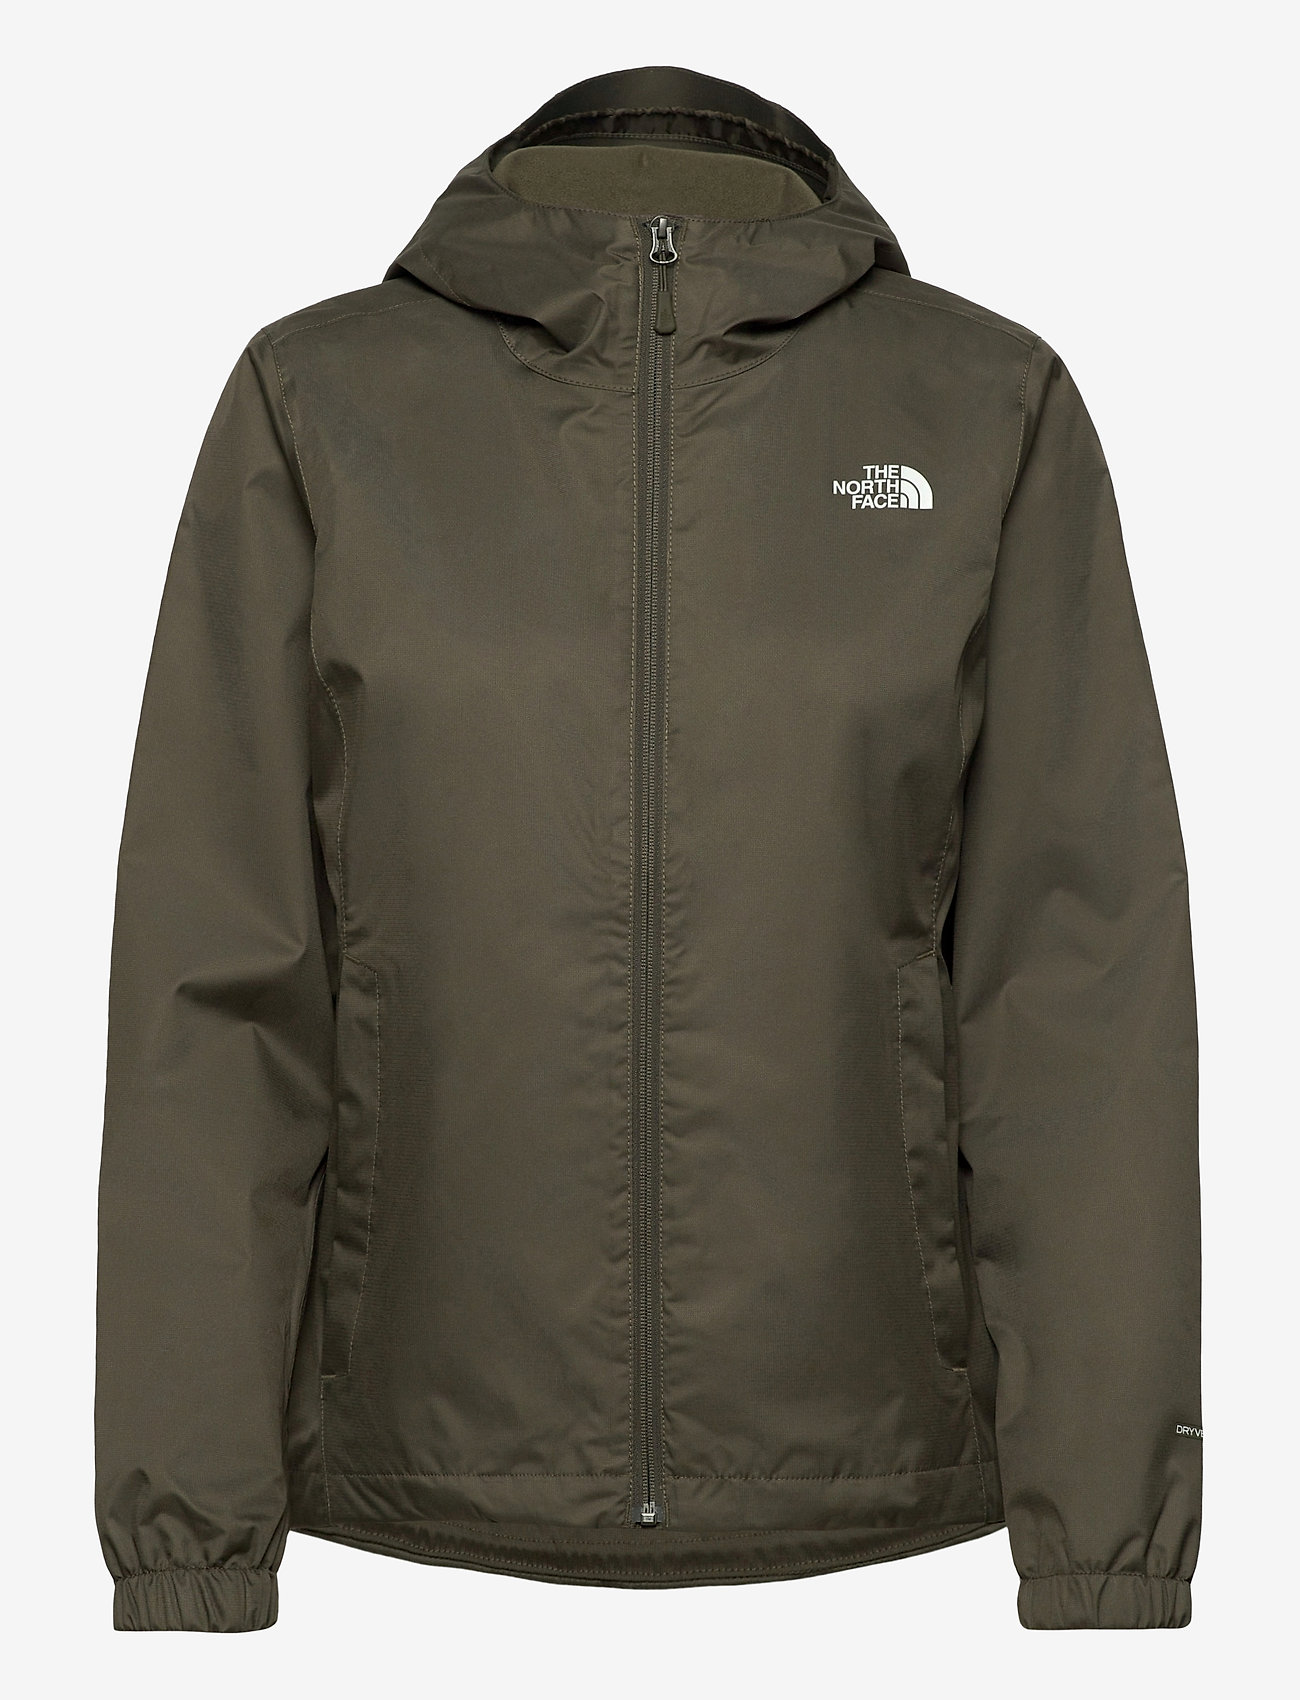 The North Face - W QUEST JACKET - EU - new taupe green/tnf white - 1